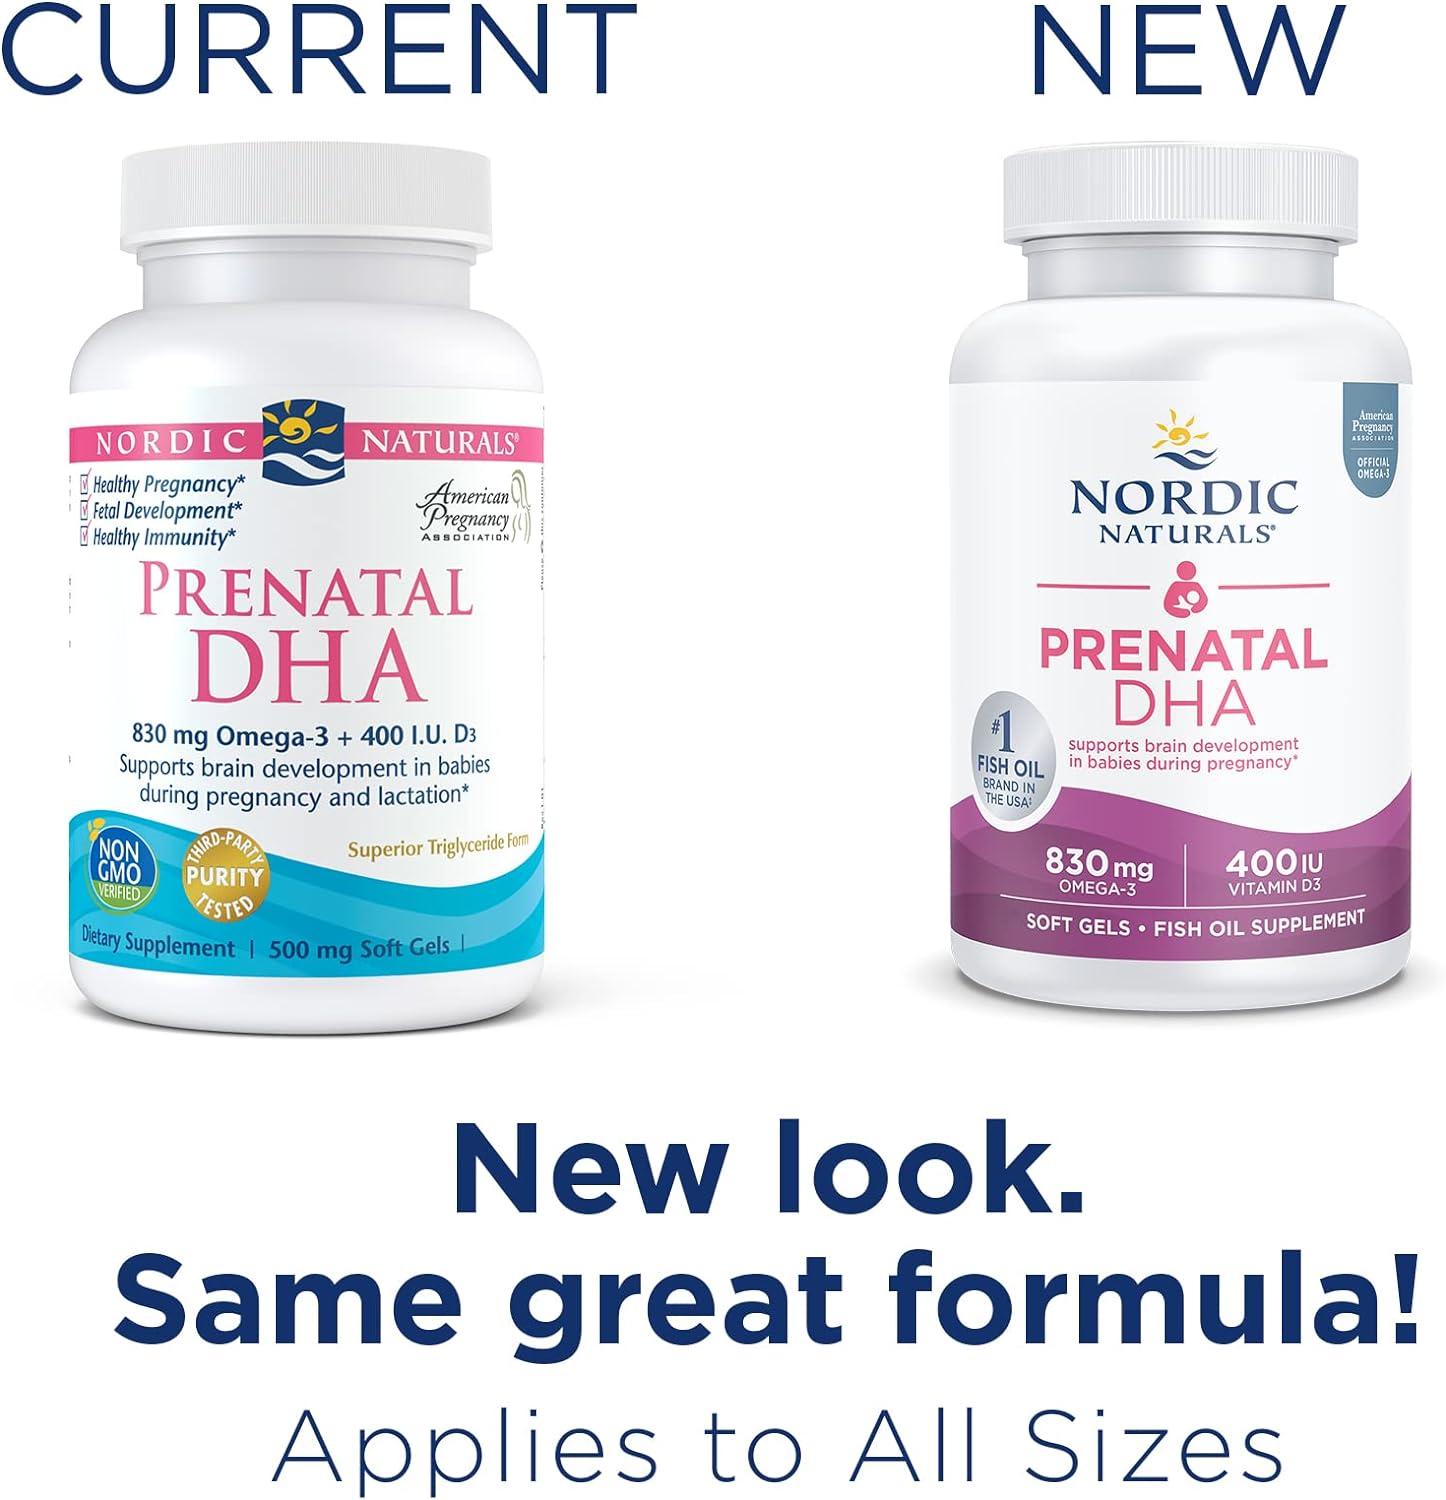 Nordic Naturals Prenatal DHA, Unflavored - 90 Soft Gels - 830 mg Omega-3 + 400 IU Vitamin D3 - Supports Brain Development in Babies During Pregnancy  Lactation - Non-GMO - 45 Servings